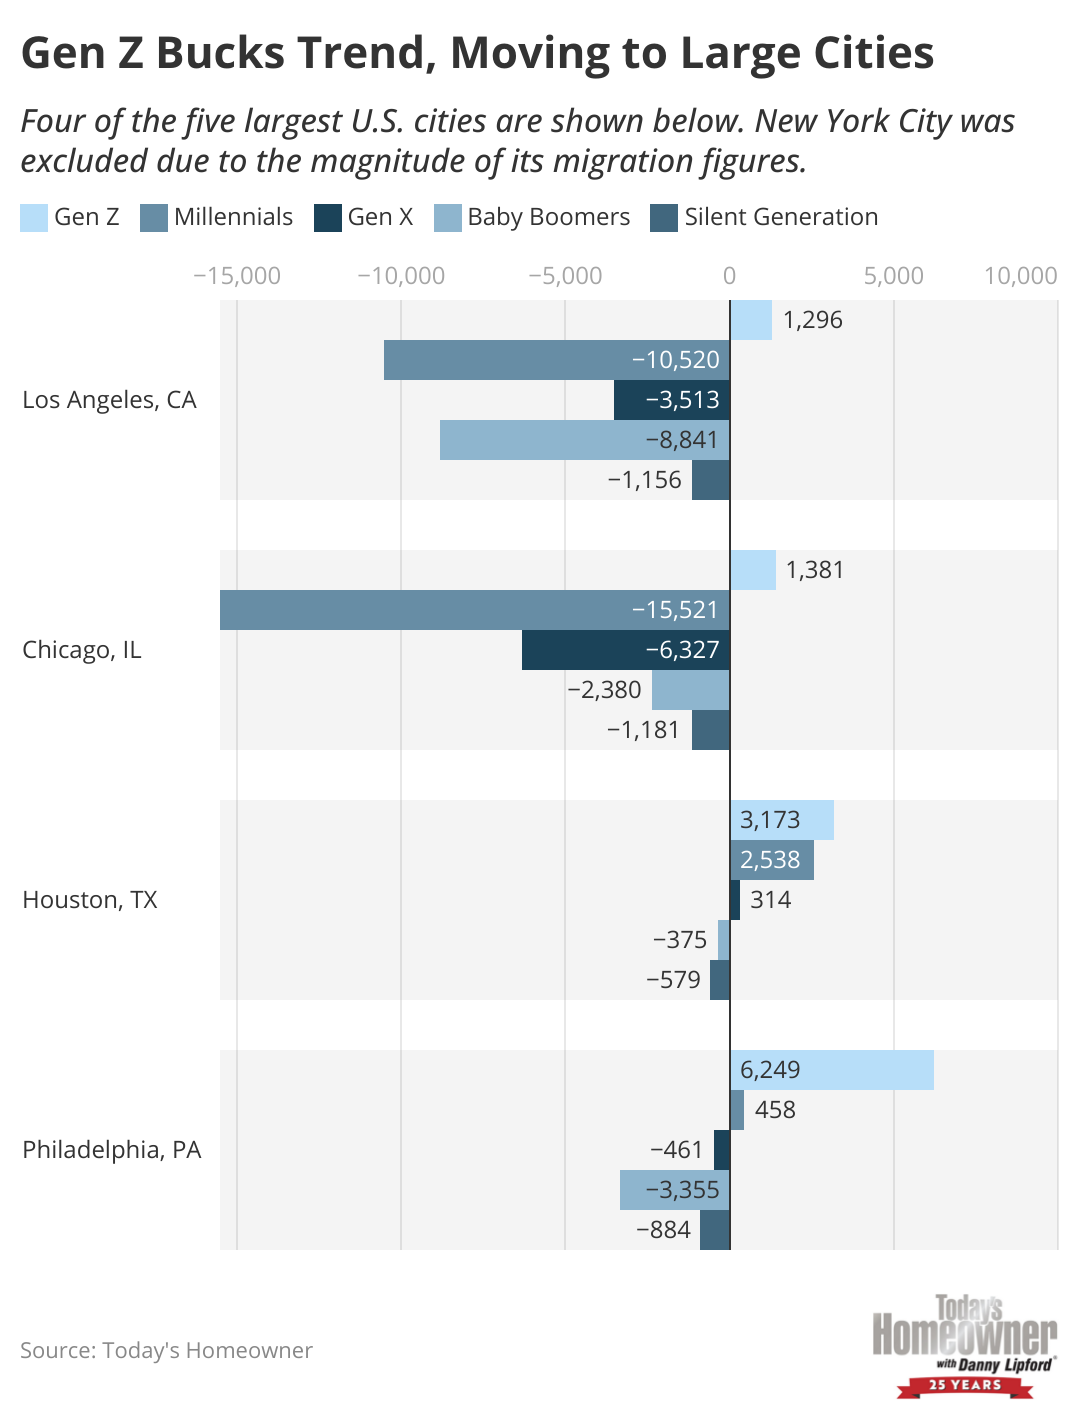 Bar chart showing Gen Z moving to larger cities as other generations leave.